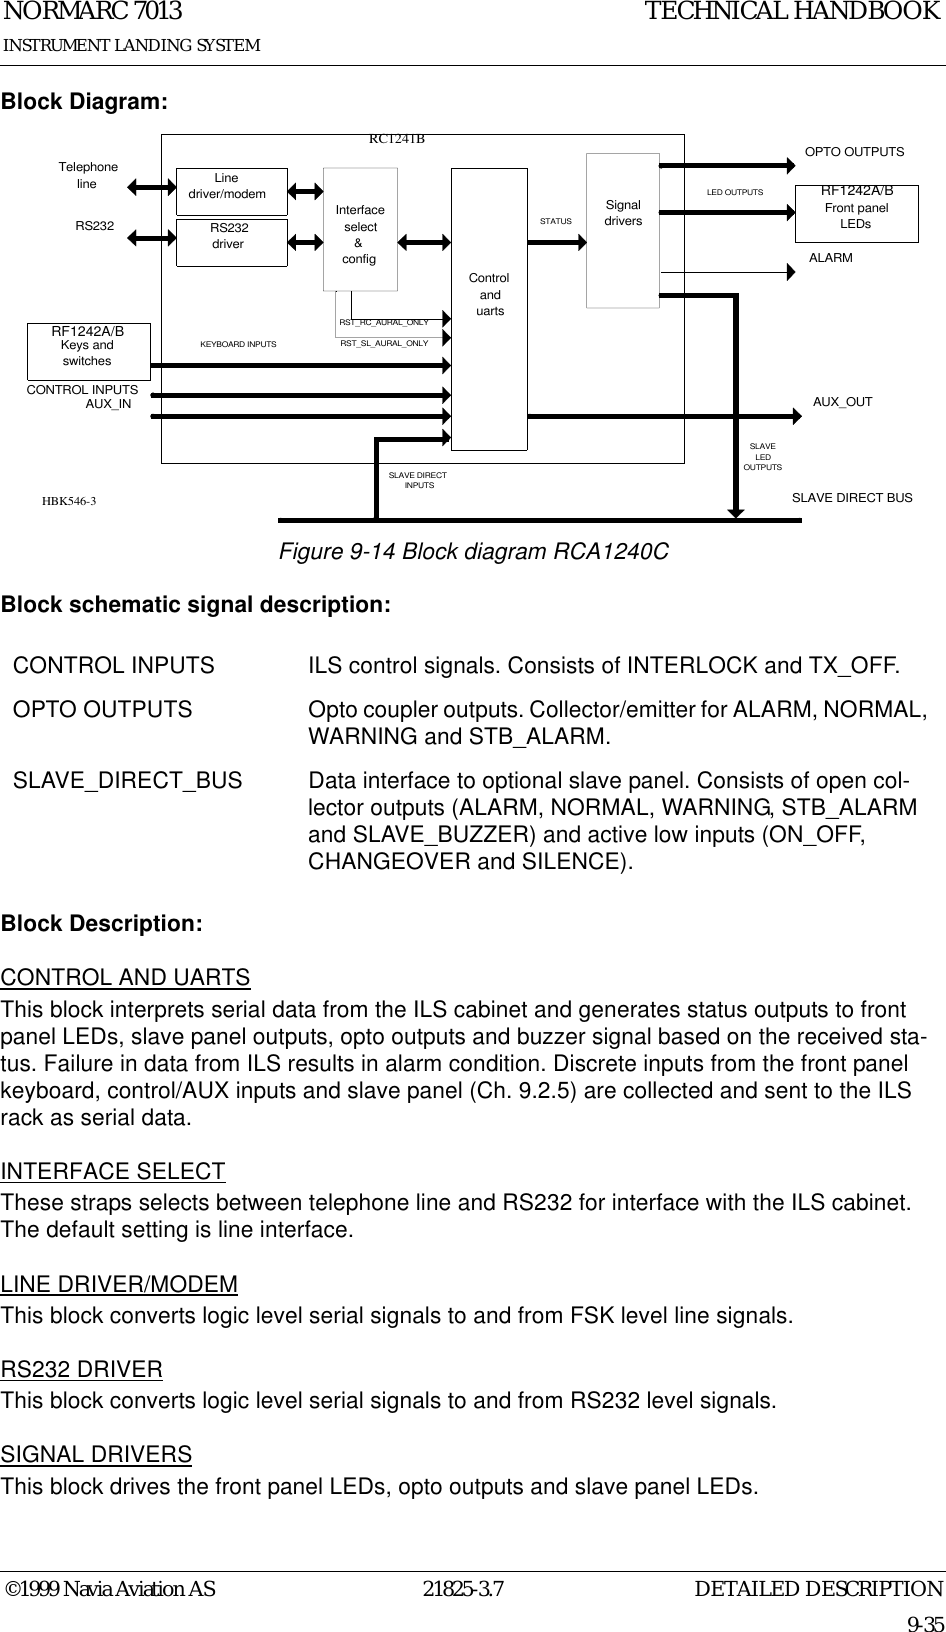 DETAILED DESCRIPTIONNORMARC 701321825-3.79-35INSTRUMENT LANDING SYSTEMTECHNICAL HANDBOOK©1999 Navia Aviation ASBlock Diagram:Figure 9-14 Block diagram RCA1240CBlock schematic signal description:Block Description:CONTROL AND UARTSThis block interprets serial data from the ILS cabinet and generates status outputs to front panel LEDs, slave panel outputs, opto outputs and buzzer signal based on the received sta-tus. Failure in data from ILS results in alarm condition. Discrete inputs from the front panel keyboard, control/AUX inputs and slave panel (Ch. 9.2.5) are collected and sent to the ILS rack as serial data. INTERFACE SELECTThese straps selects between telephone line and RS232 for interface with the ILS cabinet. The default setting is line interface.LINE DRIVER/MODEMThis block converts logic level serial signals to and from FSK level line signals.RS232 DRIVERThis block converts logic level serial signals to and from RS232 level signals.SIGNAL DRIVERSThis block drives the front panel LEDs, opto outputs and slave panel LEDs.CONTROL INPUTS ILS control signals. Consists of INTERLOCK and TX_OFF.OPTO OUTPUTS Opto coupler outputs. Collector/emitter for ALARM, NORMAL, WARNING and STB_ALARM.SLAVE_DIRECT_BUS Data interface to optional slave panel. Consists of open col-lector outputs (ALARM, NORMAL, WARNING, STB_ALARM and SLAVE_BUZZER) and active low inputs (ON_OFF, CHANGEOVER and SILENCE).Linedriver/modemTelephonelineControlanduartsLED OUTPUTSRC1241BRS232driverRS232SignaldriversSLAVE DIRECT BUSRF1242A/BFront panelLEDsAUX_IN AUX_OUTKEYBOARD INPUTSRF1242A/BKeys andswitchesCONTROL INPUTSSLAVE DIRECTINPUTSSLAVELEDOUTPUTSOPTO OUTPUTSInterfaceselect&amp;configRST_SL_AURAL_ONLYSTATUSALARMRST_RC_AURAL_ONLYHBK546-3